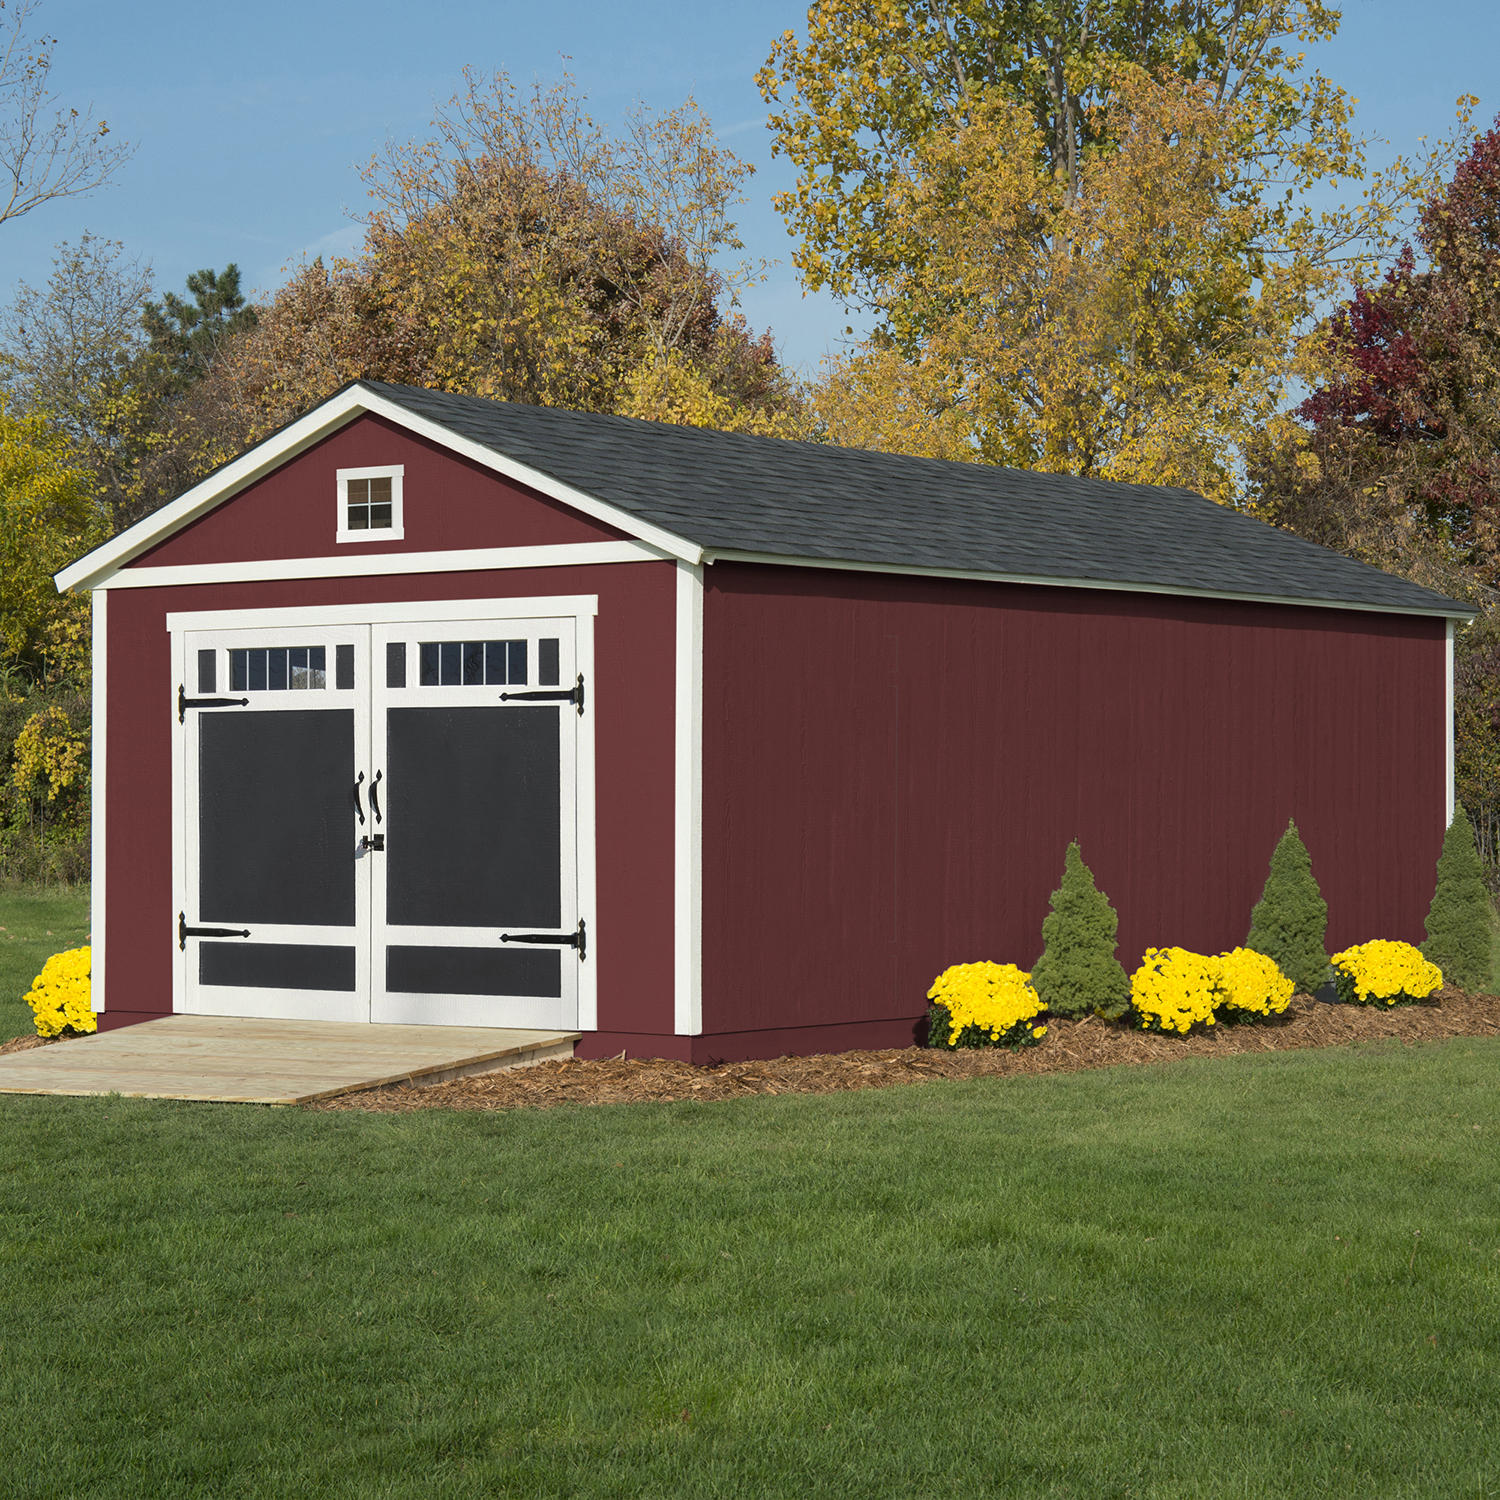 Handy Home Products Coachman 12′ x 20′ Wood Storage Shed